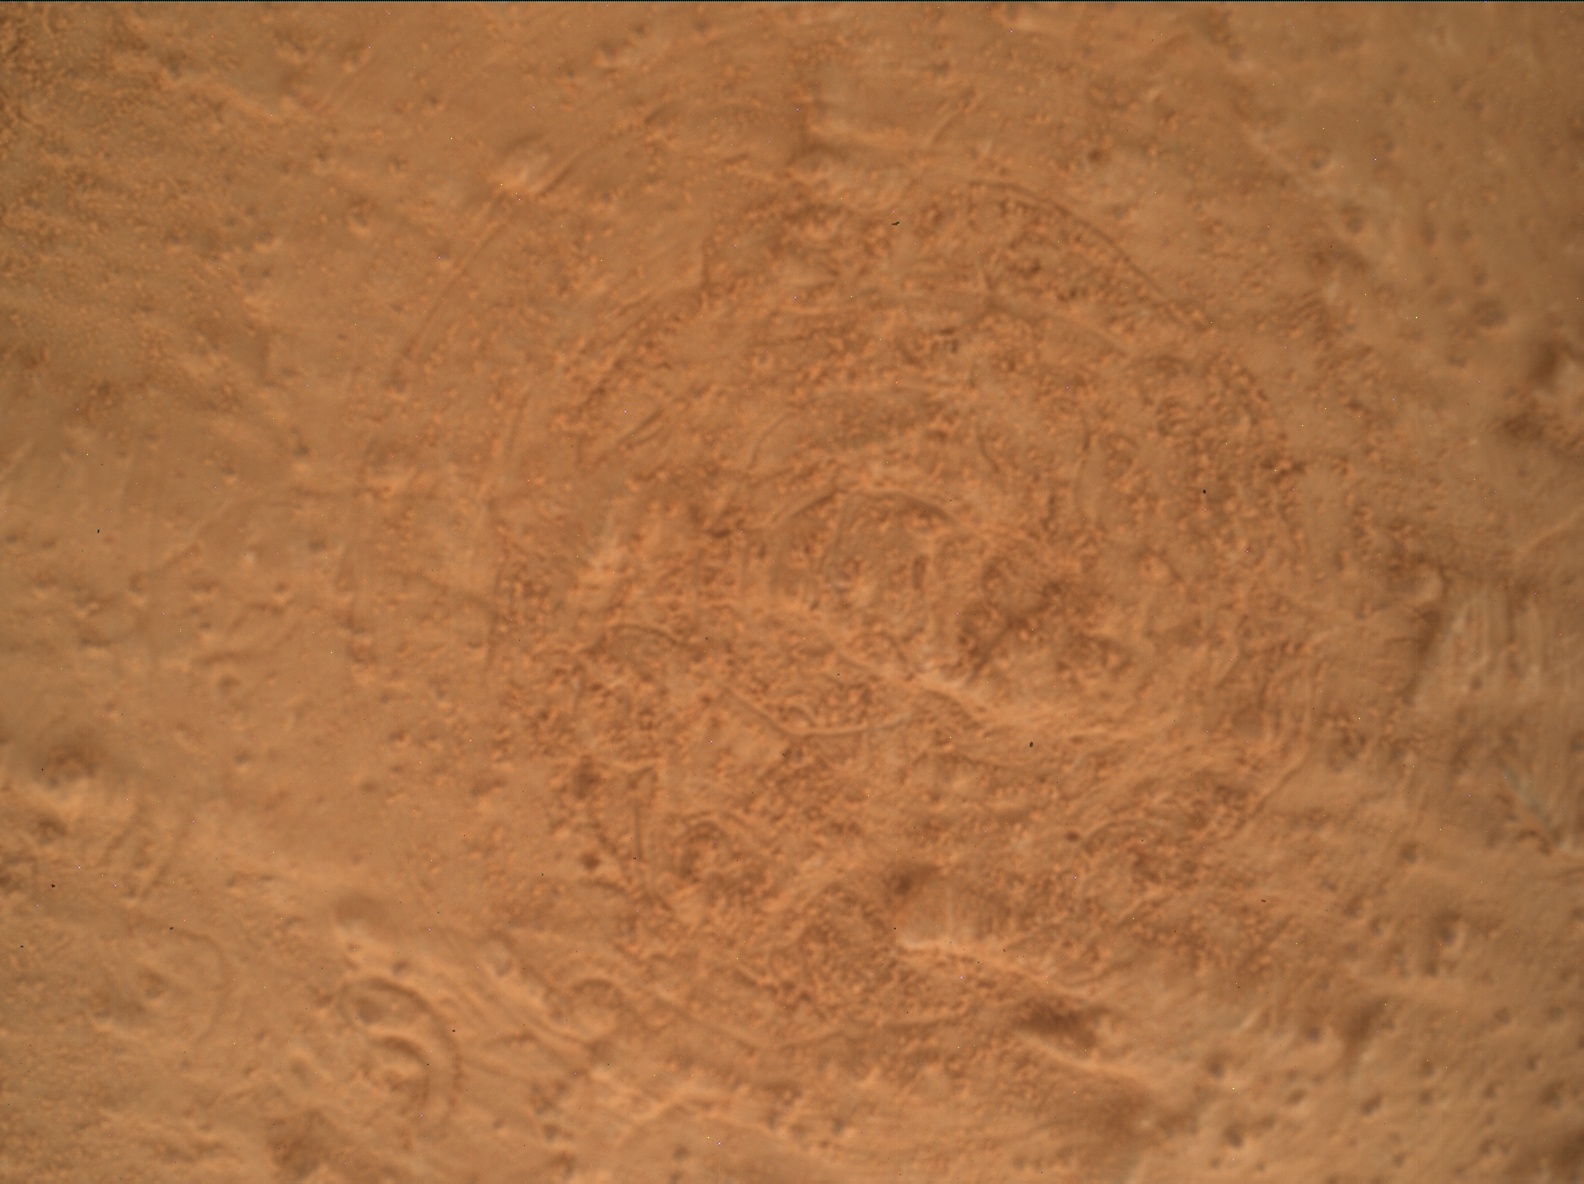 Nasa's Mars rover Curiosity acquired this image using its Mars Hand Lens Imager (MAHLI) on Sol 3483